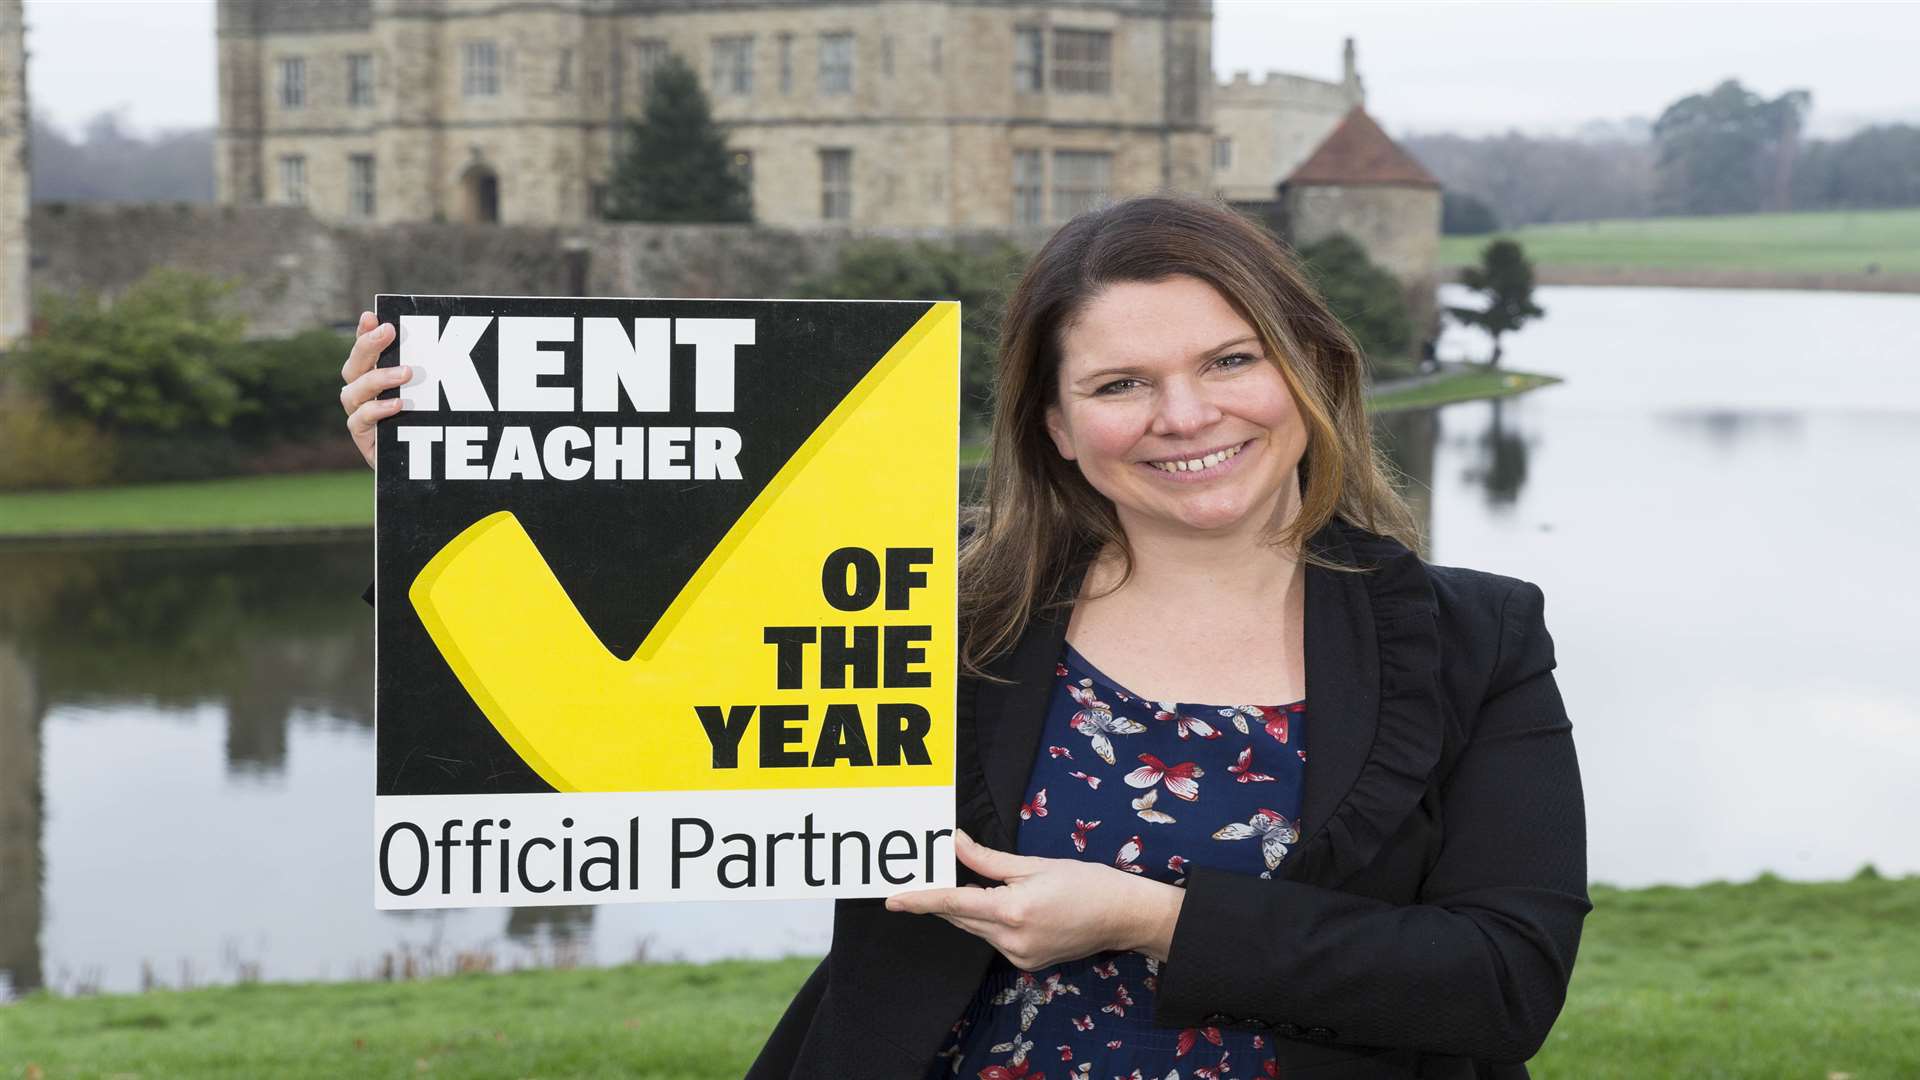 Rebecca Smith of Social Enterprise Kent (SEK) which is supporting the literacy category of the Kent Teacher of the Year Awards 2016.